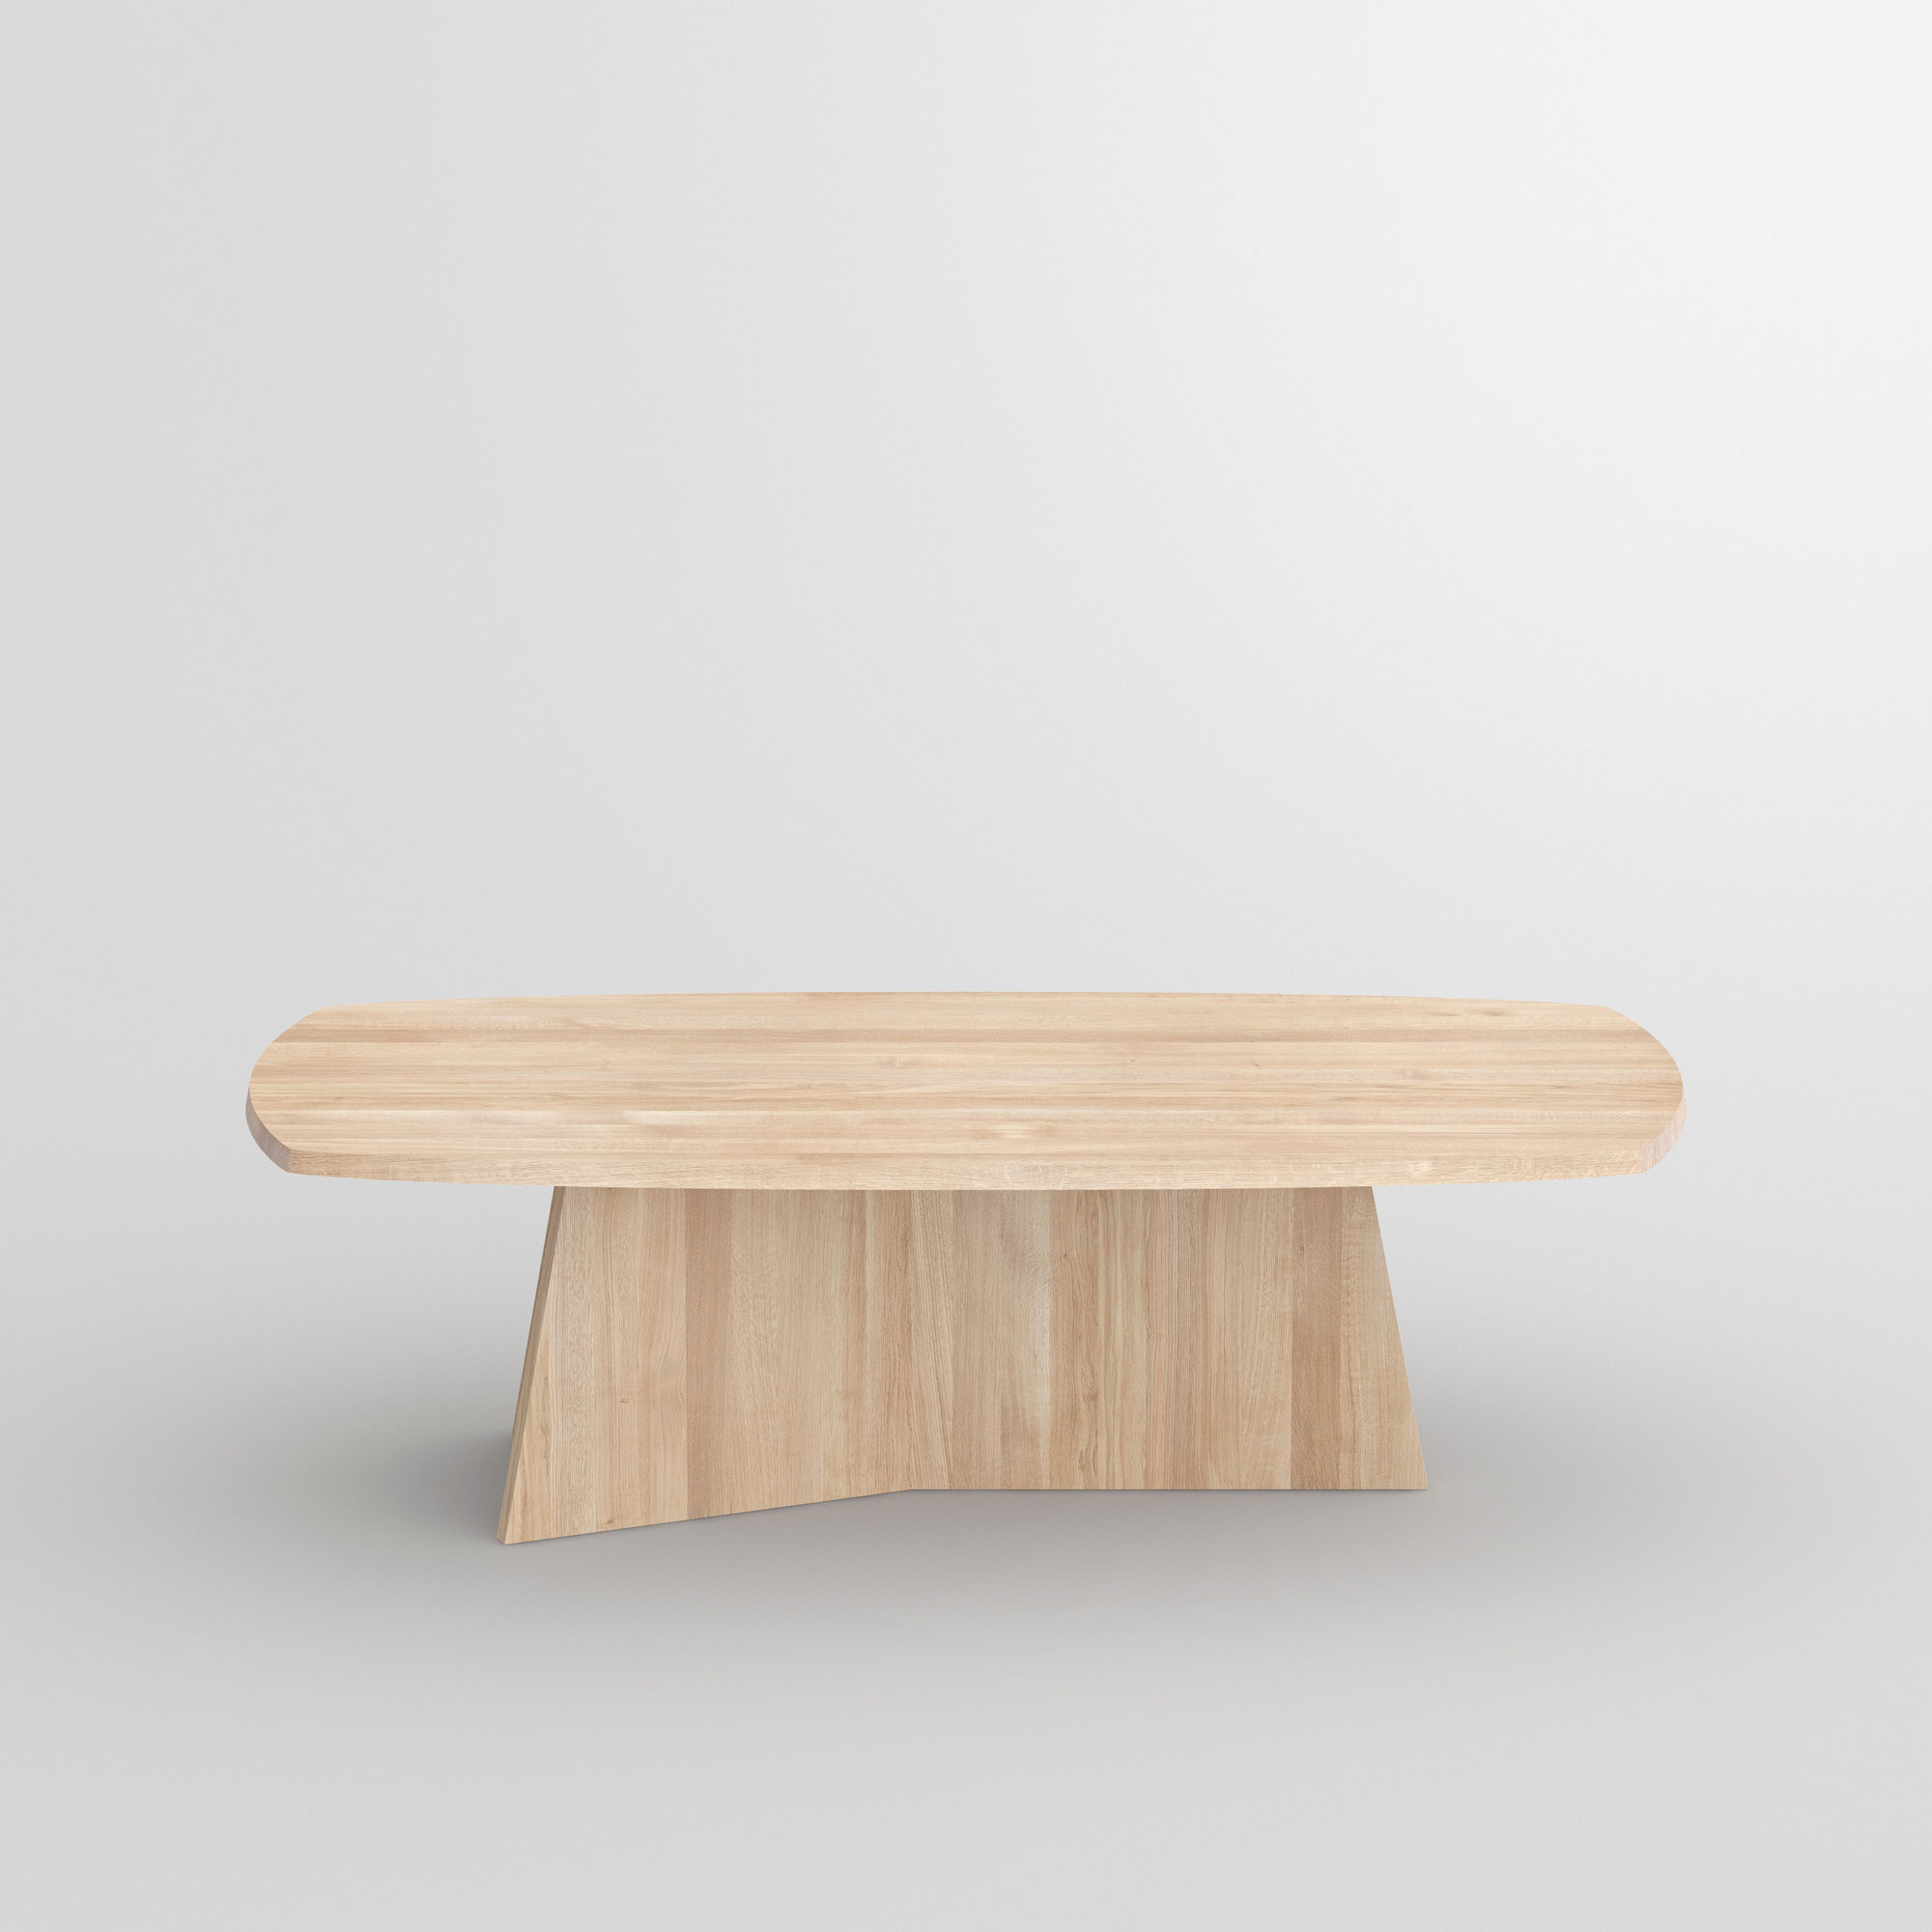 Design Dining Table LOTUS cam3 custom made in solid wood by vitamin design